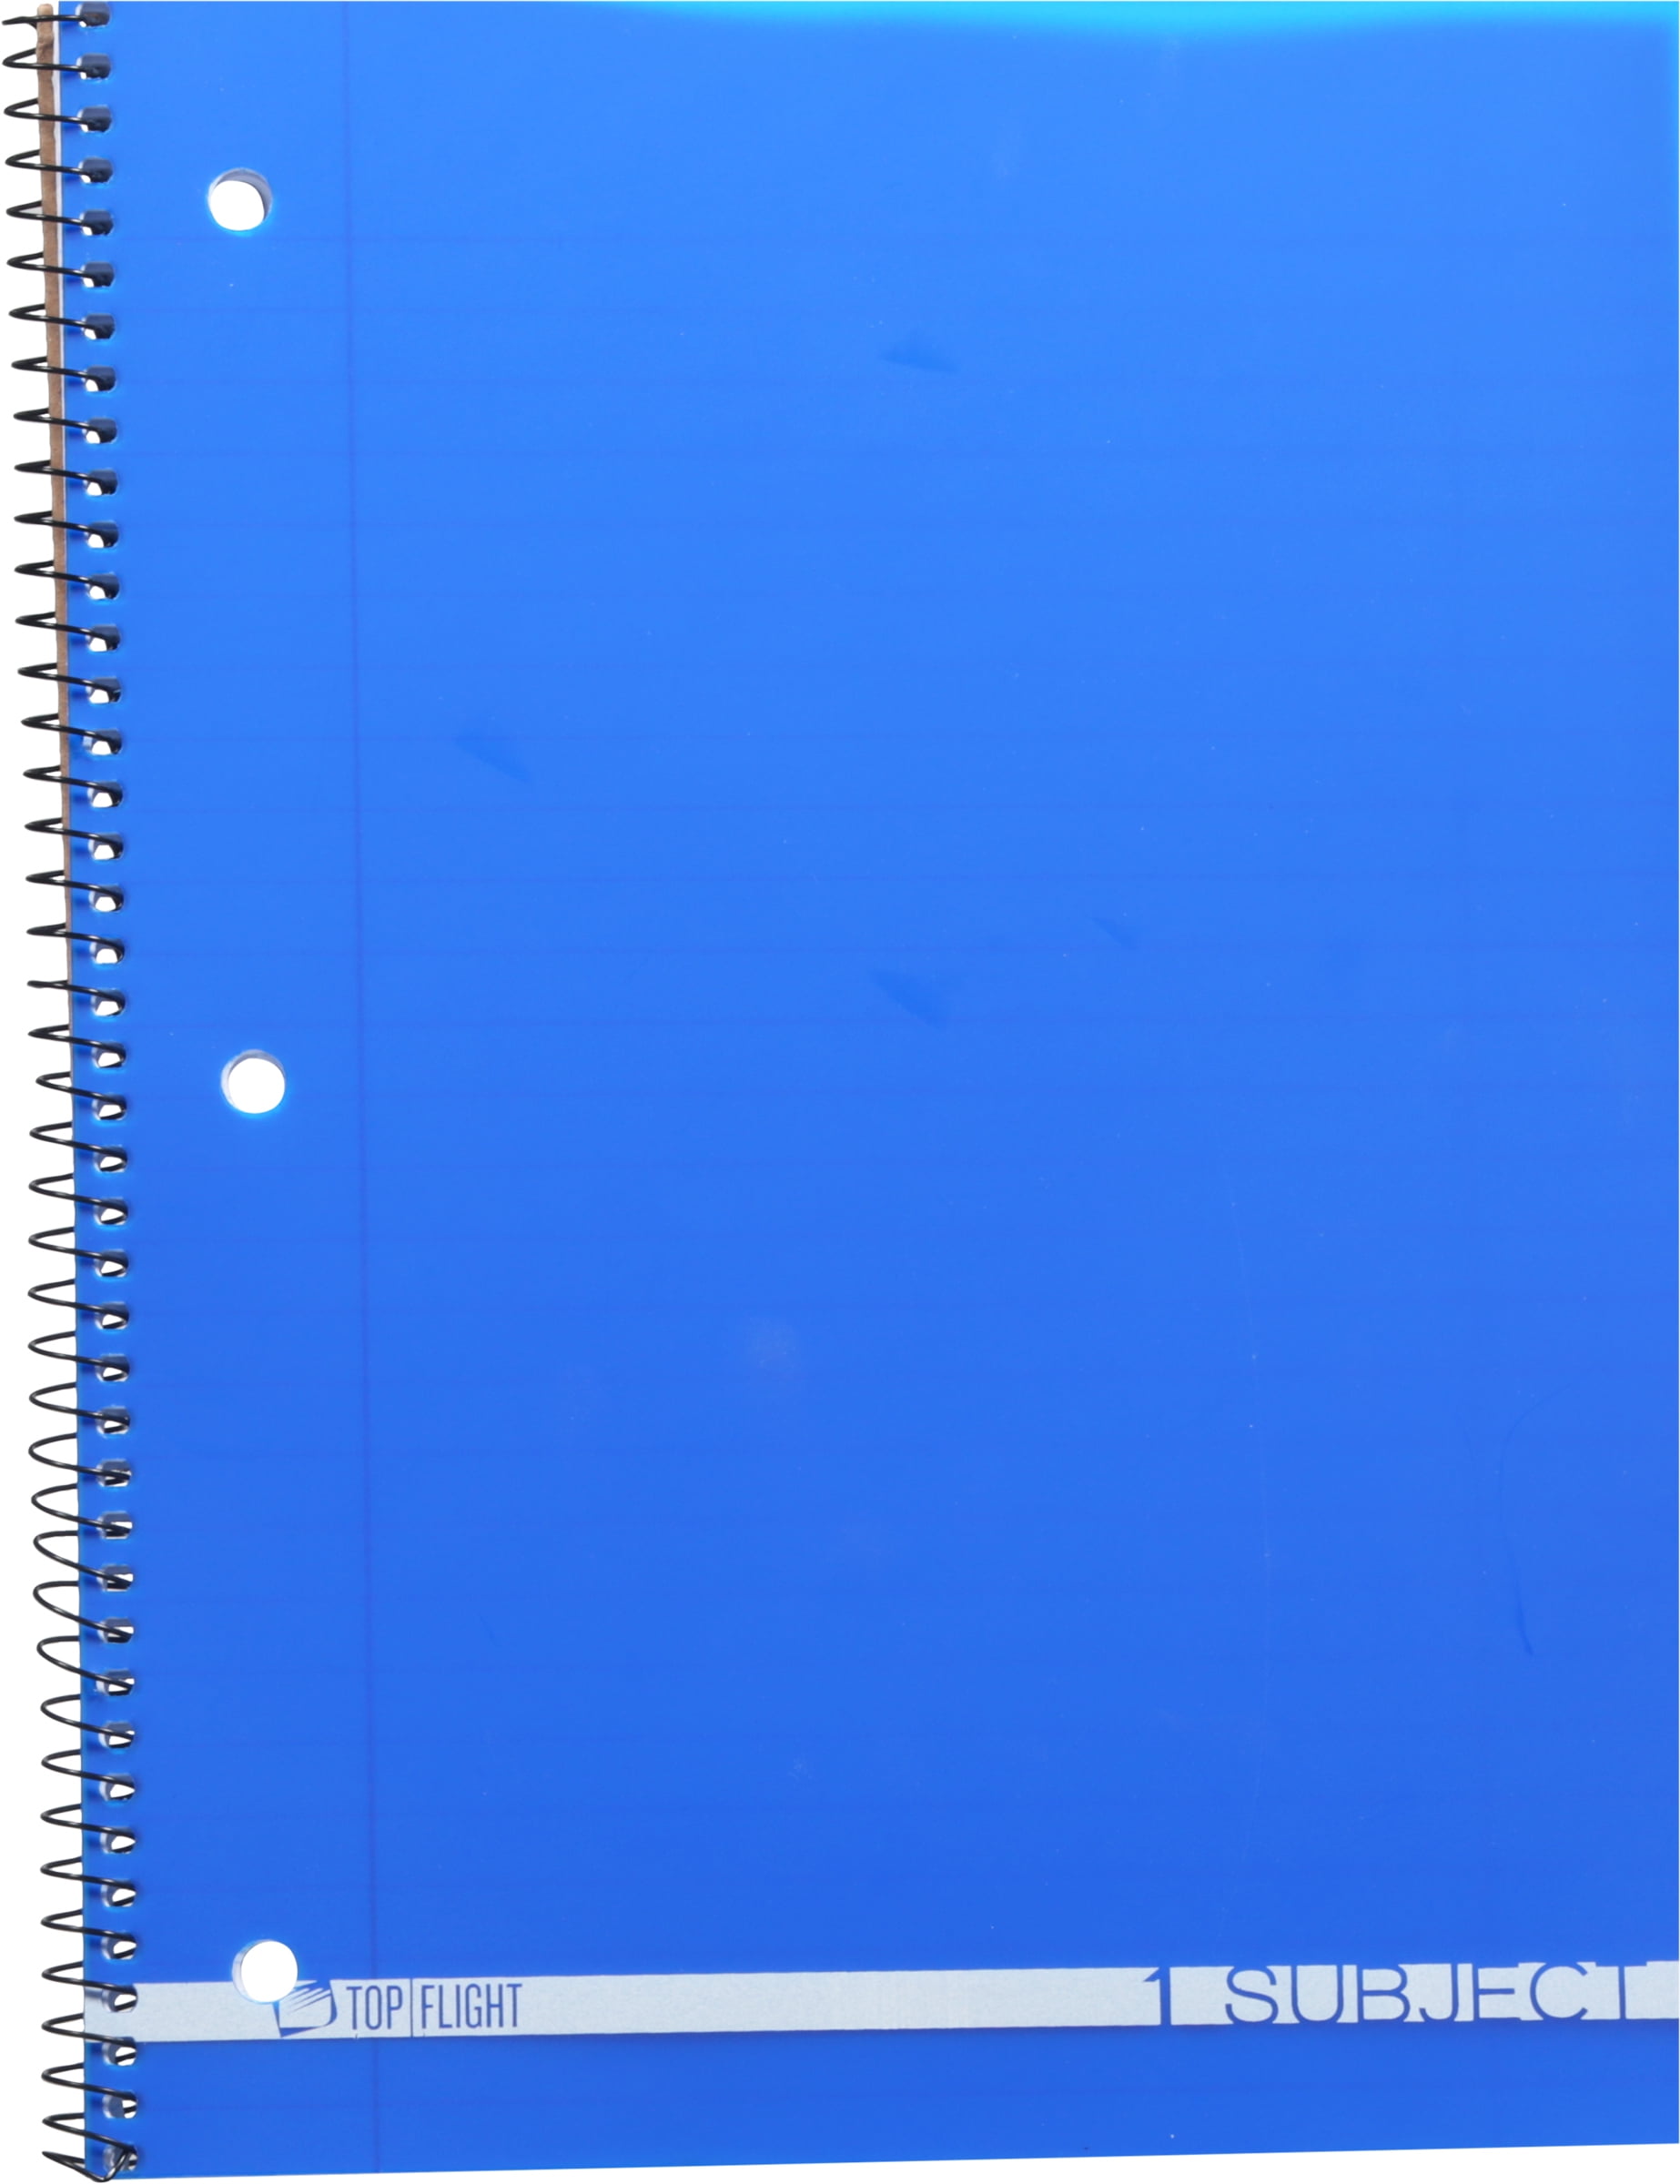 NO HOMEWORK NOTEBOOK, No Lines, No Rules, No Limits, Only Cool Stuff, I  Want To Do (blue cover)